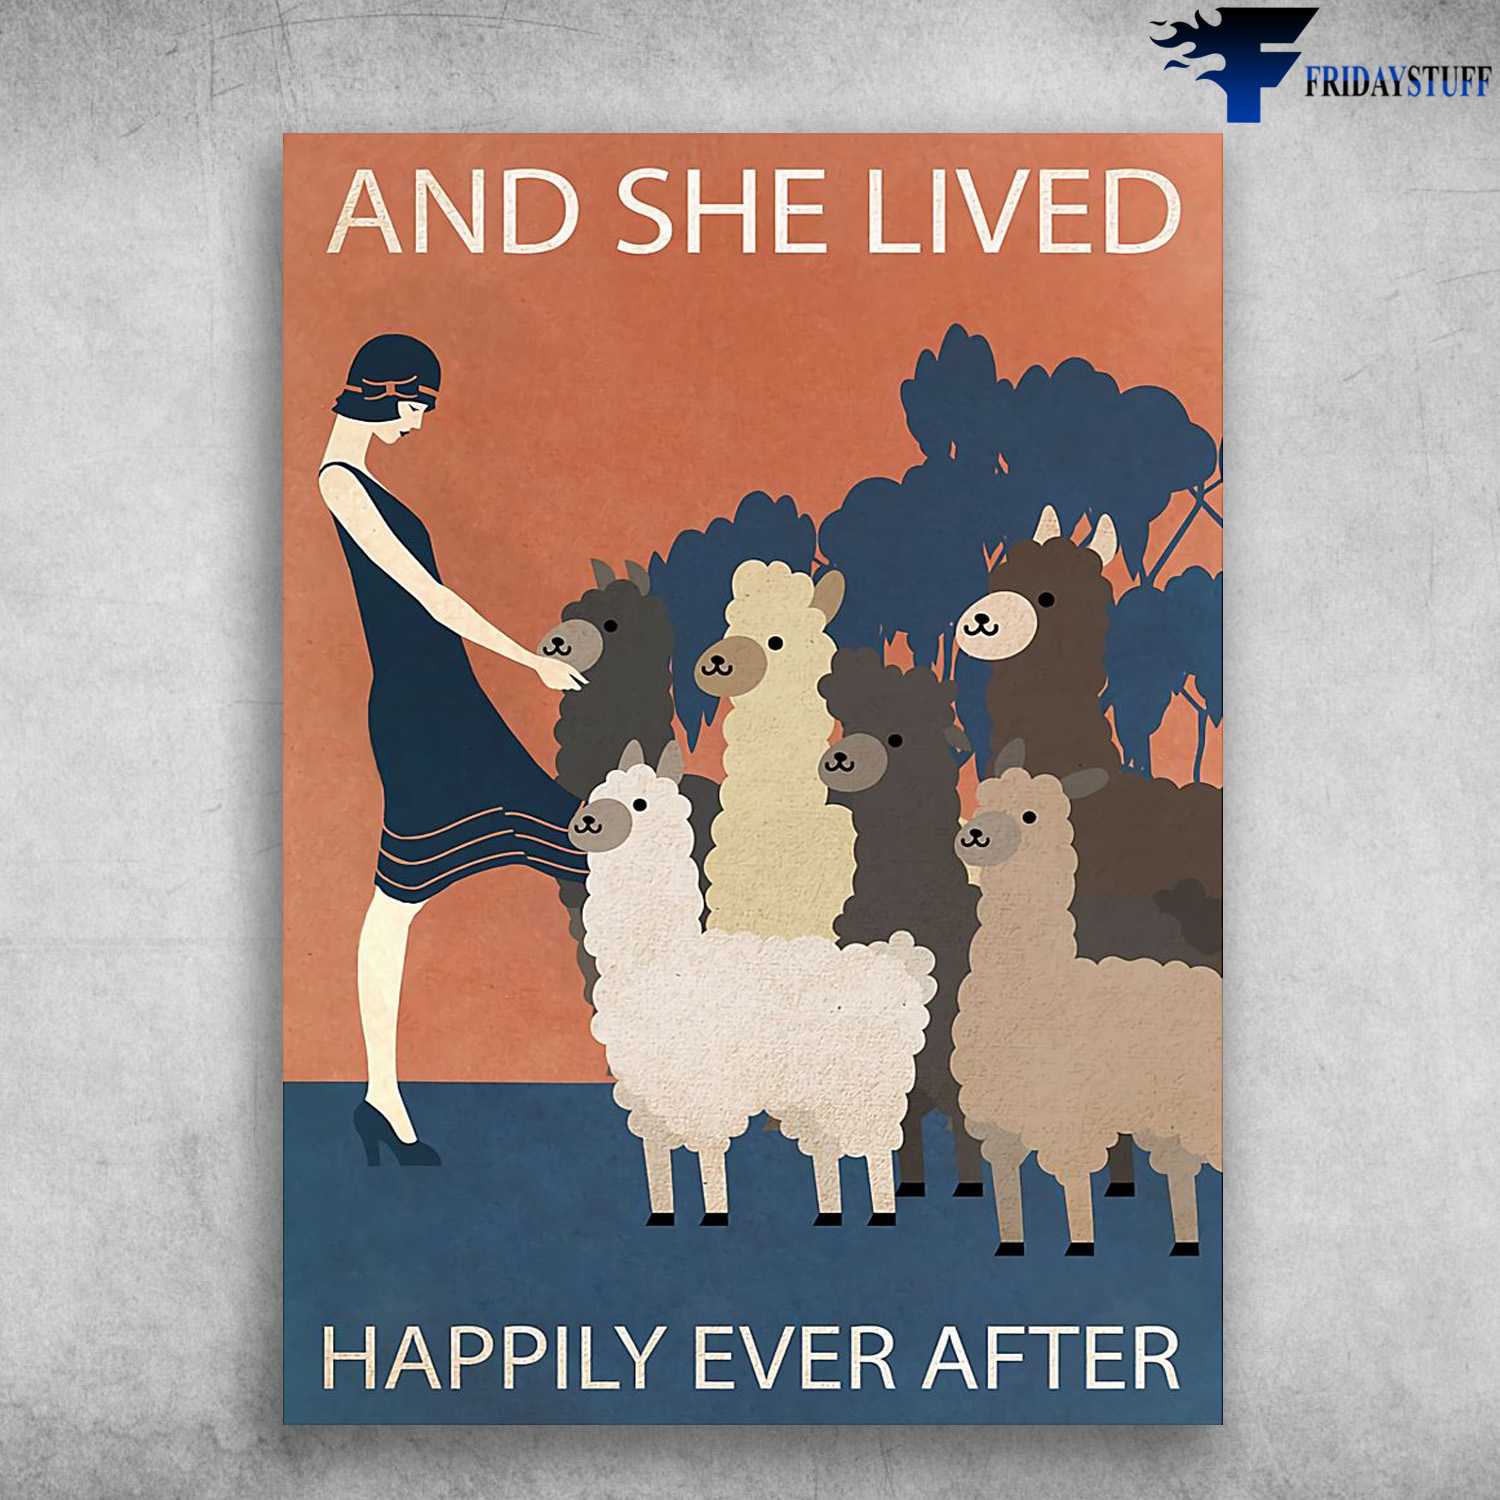 Alpaca Lover, Alpaca Poster, And She Lived, Happily Ever After